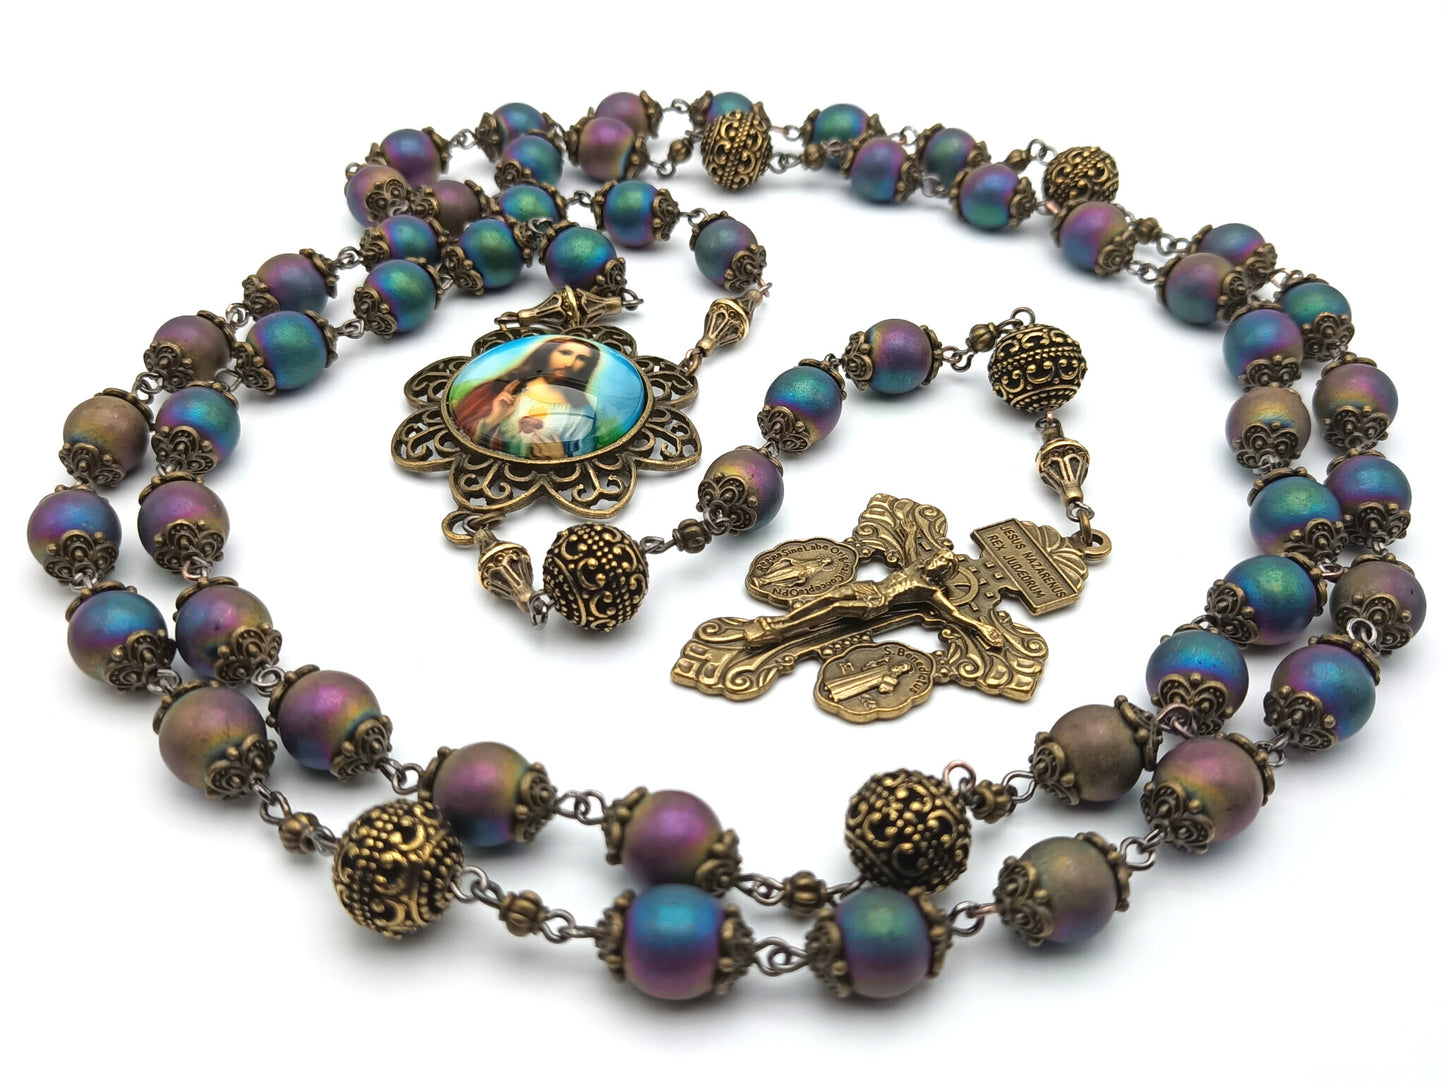 Sacred Heart of Jesus unique rosary beads with petrol gemstone beads, bronze pardon crucifix, pater beads and picture centre medal.